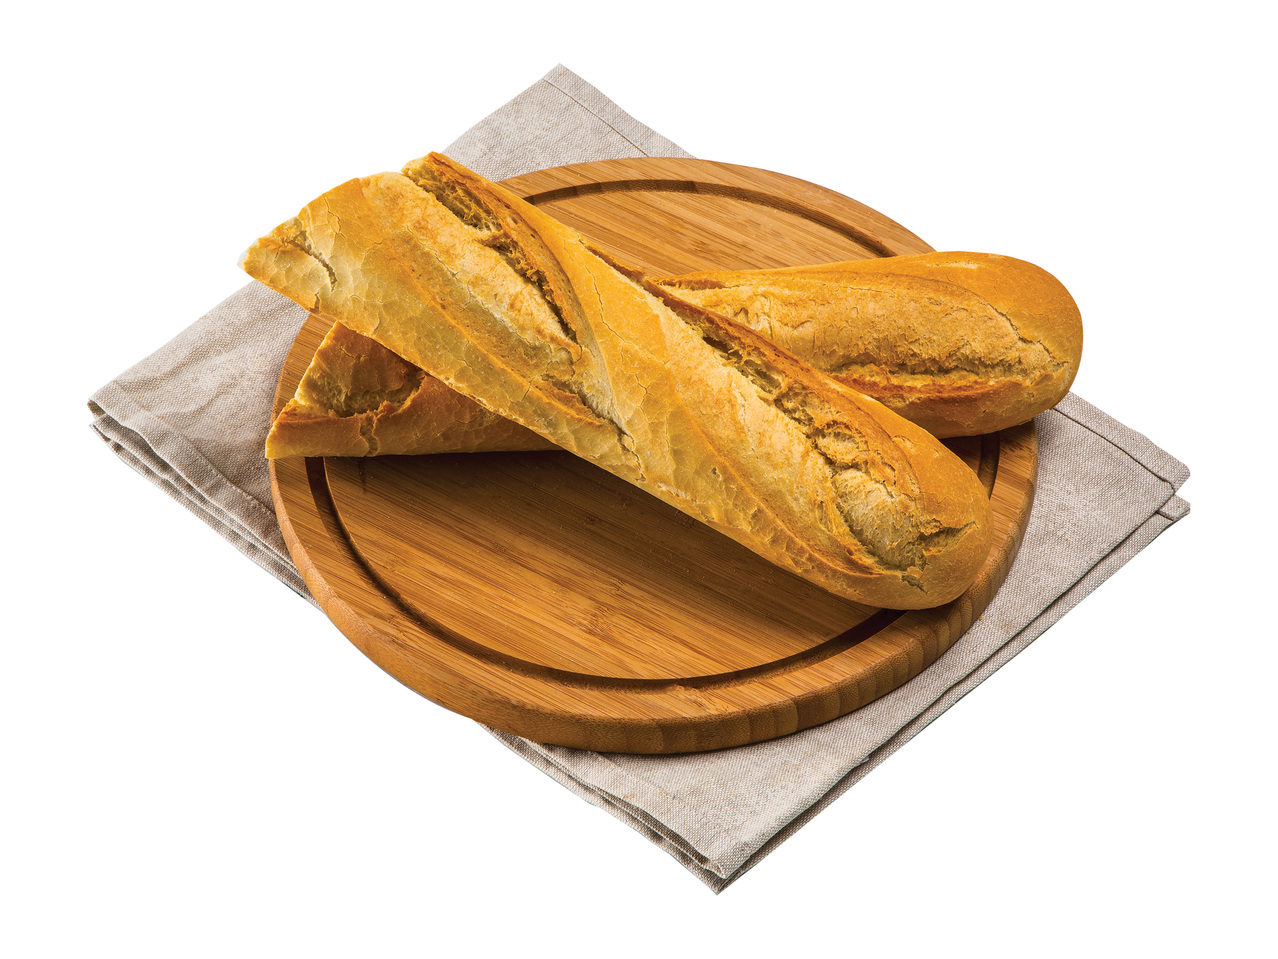 FRENCH STYLE BAGUETTE